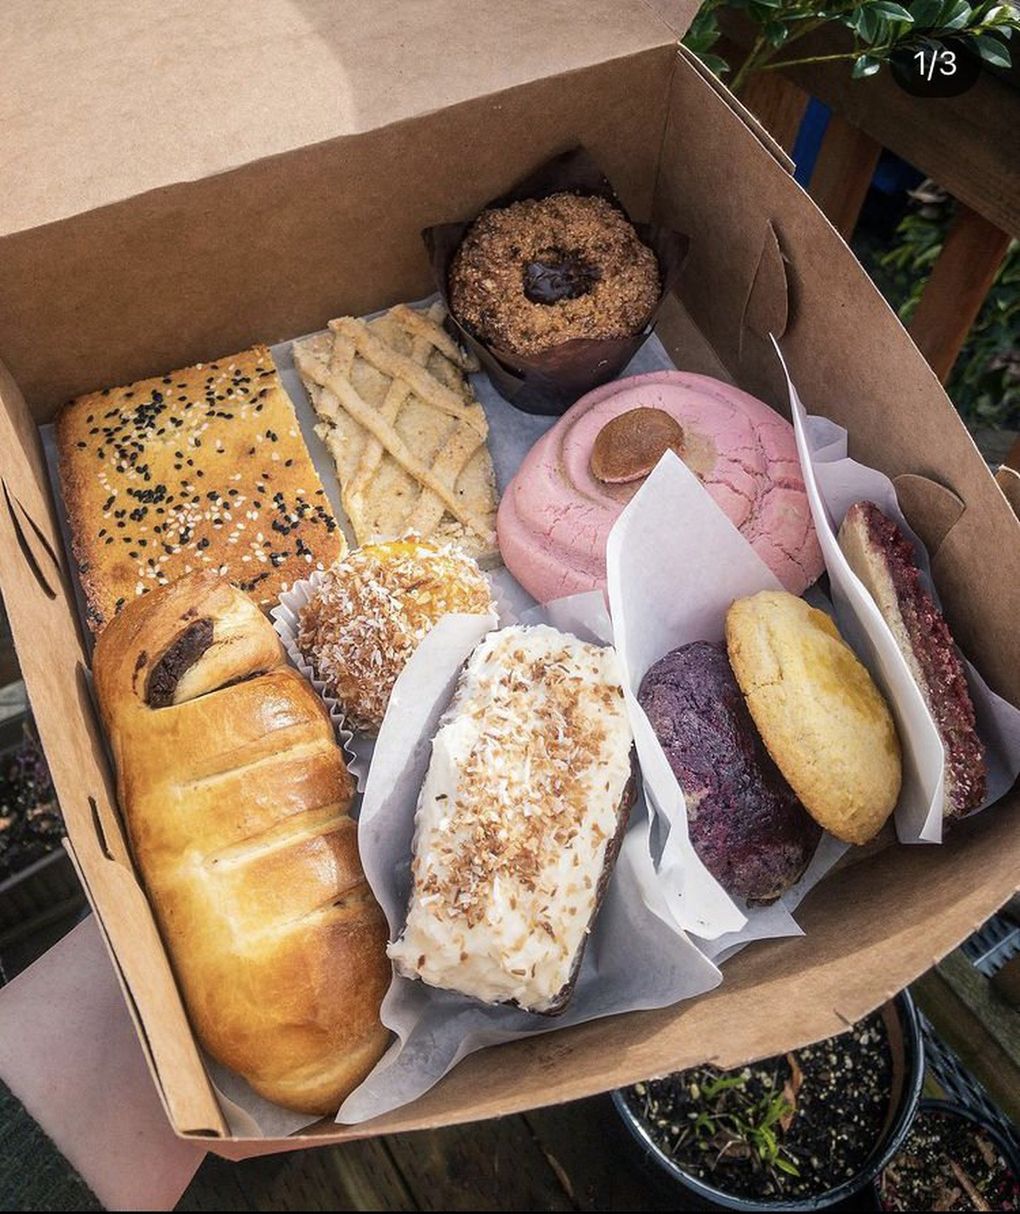 Mayra Sibrian specializes in Central American pan dulce, from sweet breads spiked with cinnamon or coconut to plantain muffins filled with chocolate ganache (plus the occasional pupusa) with her weekly pop-up, Selva Central Goods.  (Courtesy of Mayra Sibrian)